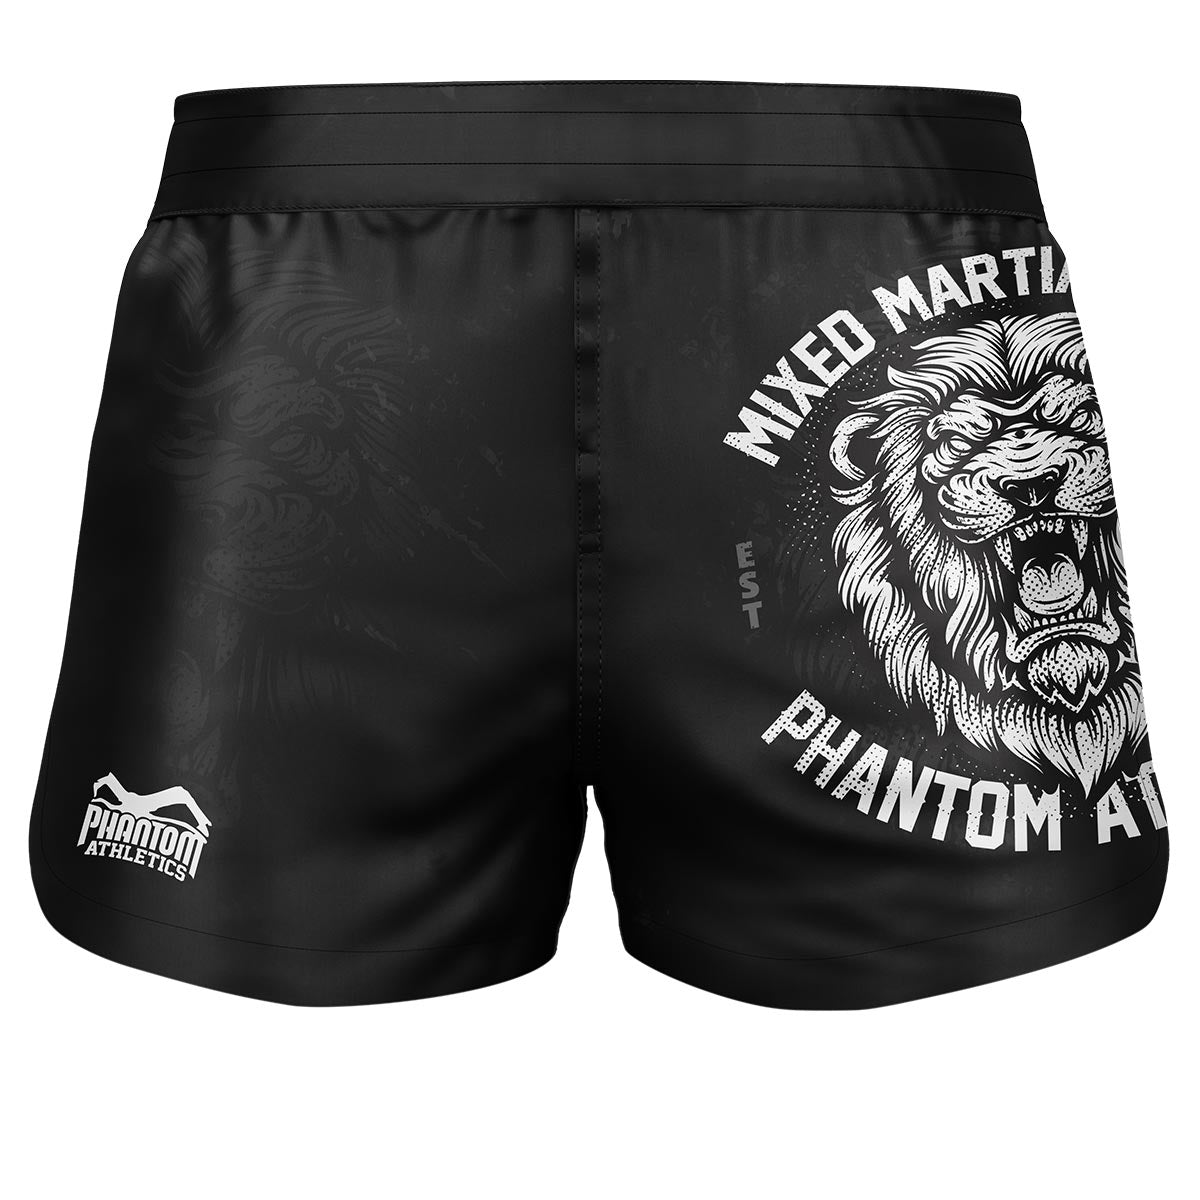 Phantom Fightshorts Fusion 2in1. Ultimate shorts for your martial arts. Ideal for MMA, Muay Thai, BJJ, wrestling and more. In black with lion design.